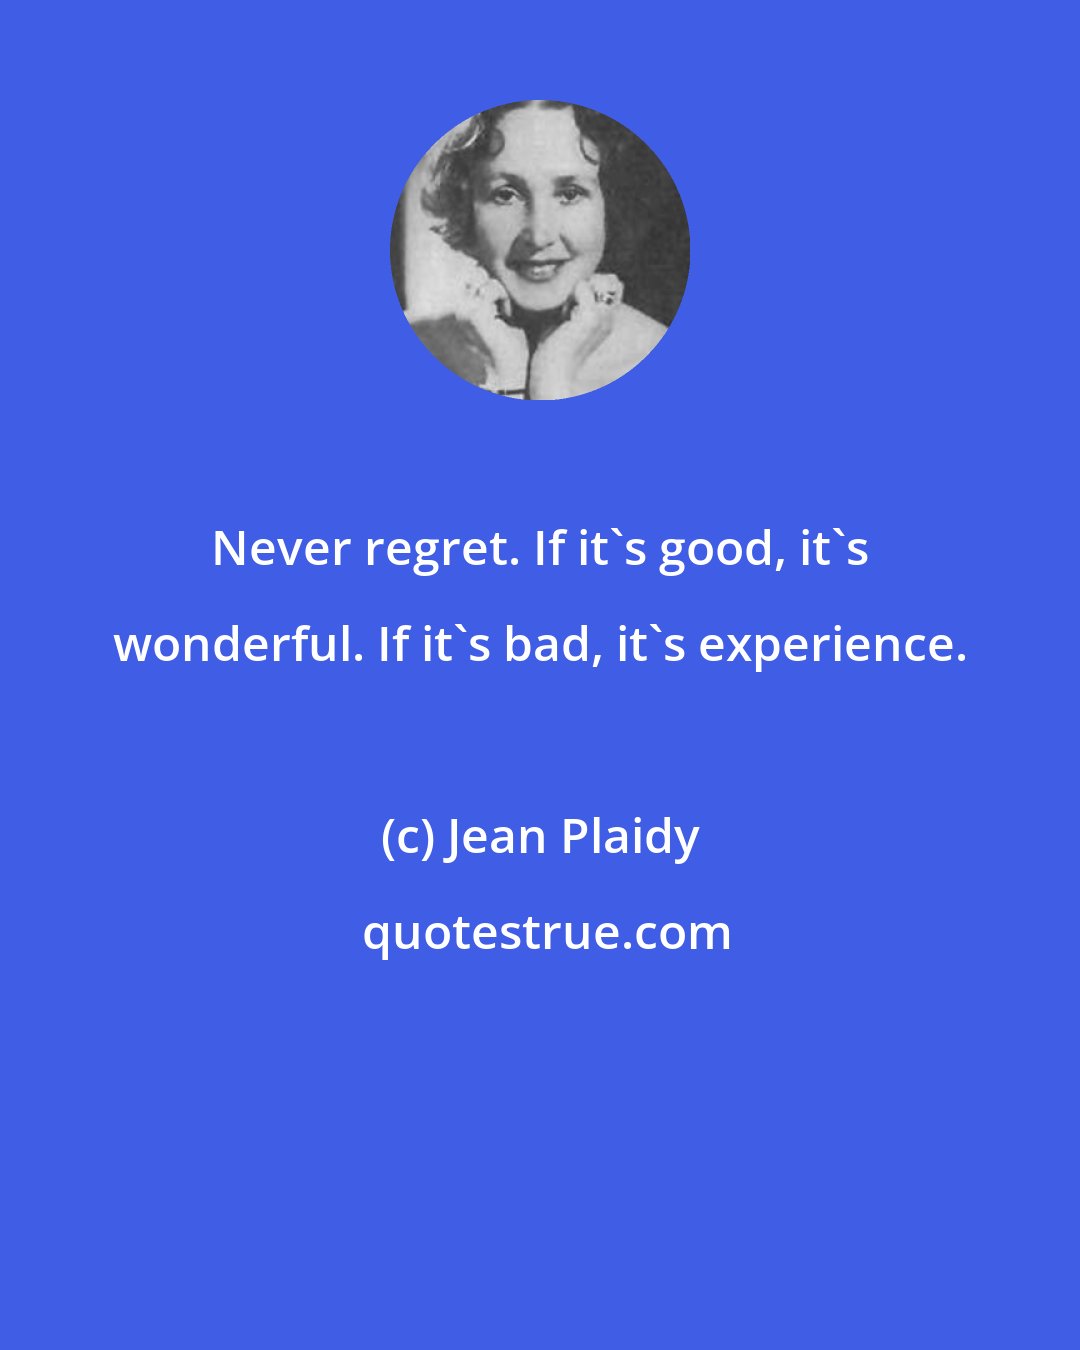 Jean Plaidy: Never regret. If it's good, it's wonderful. If it's bad, it's experience.